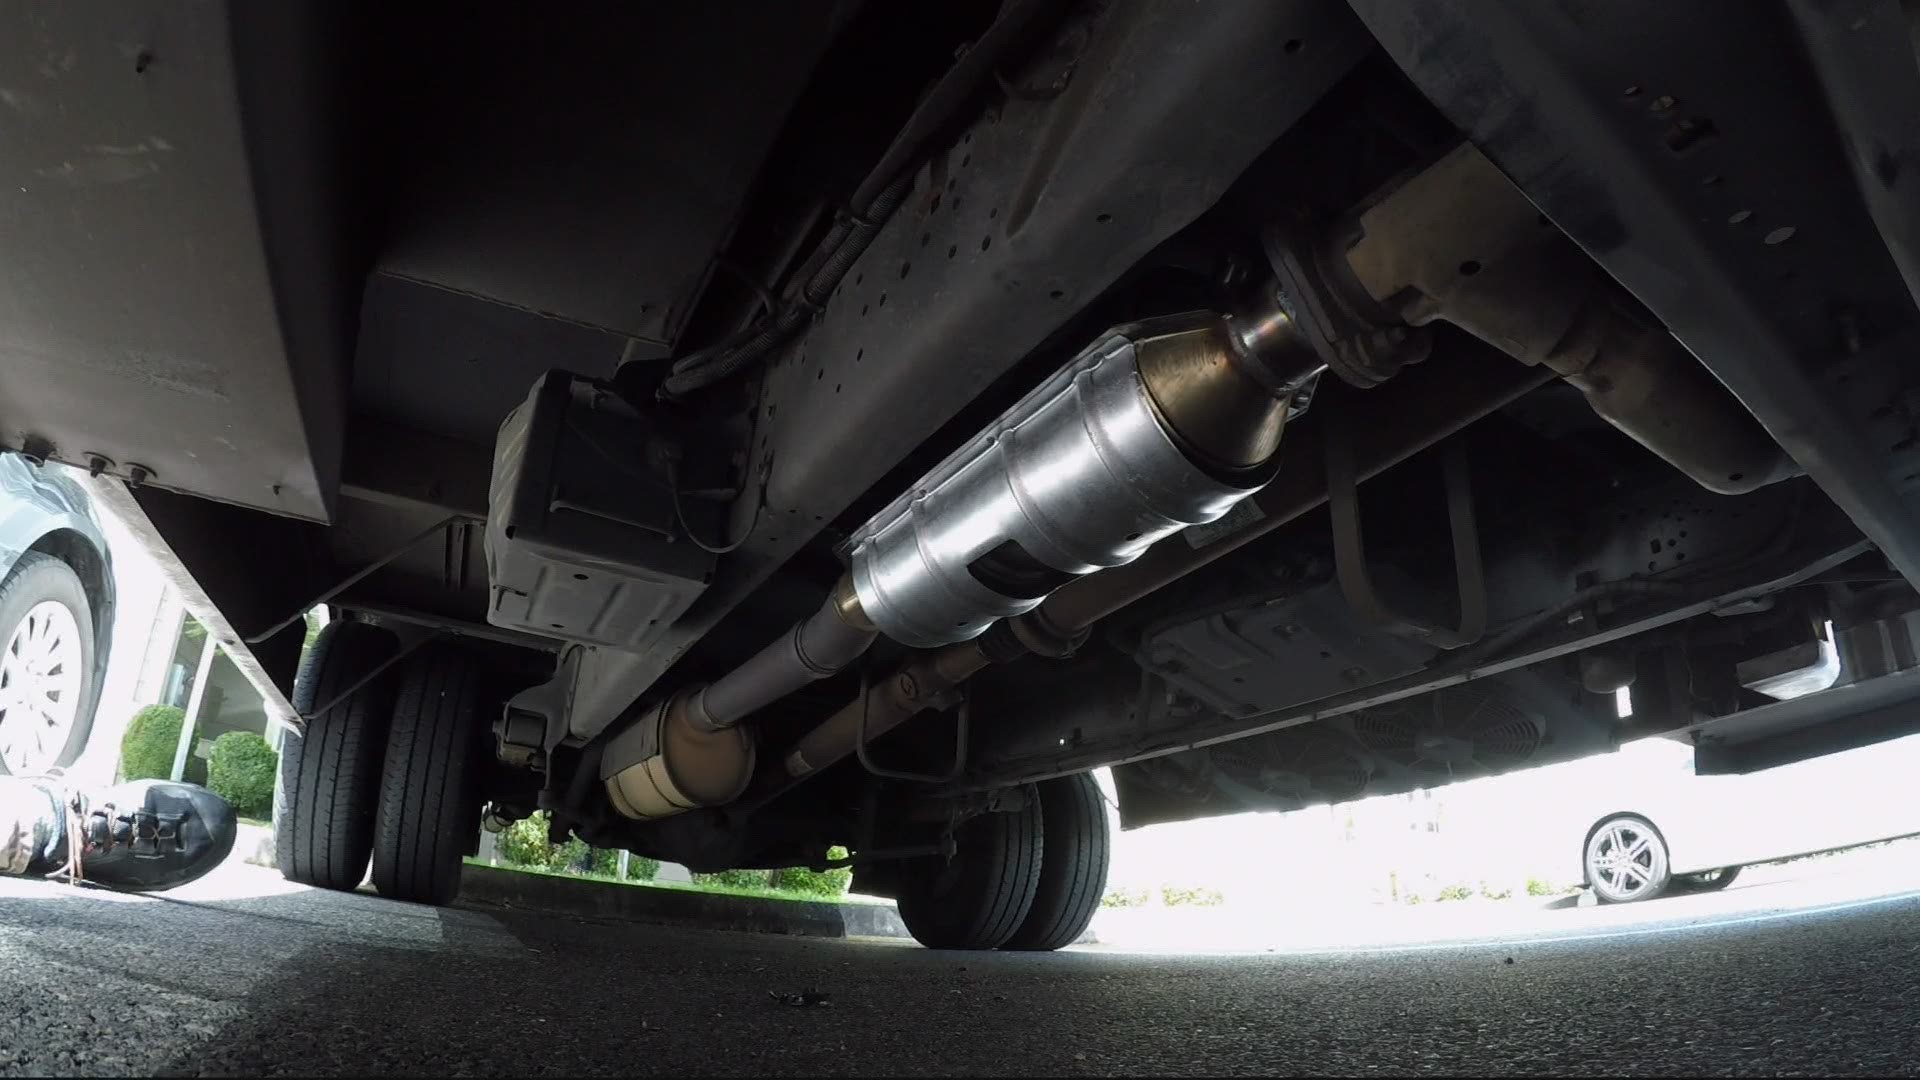 There’s been an increase in people stealing catalytic converters in the past year. Tim Gordon reports on a theft that just happened at a senior center.